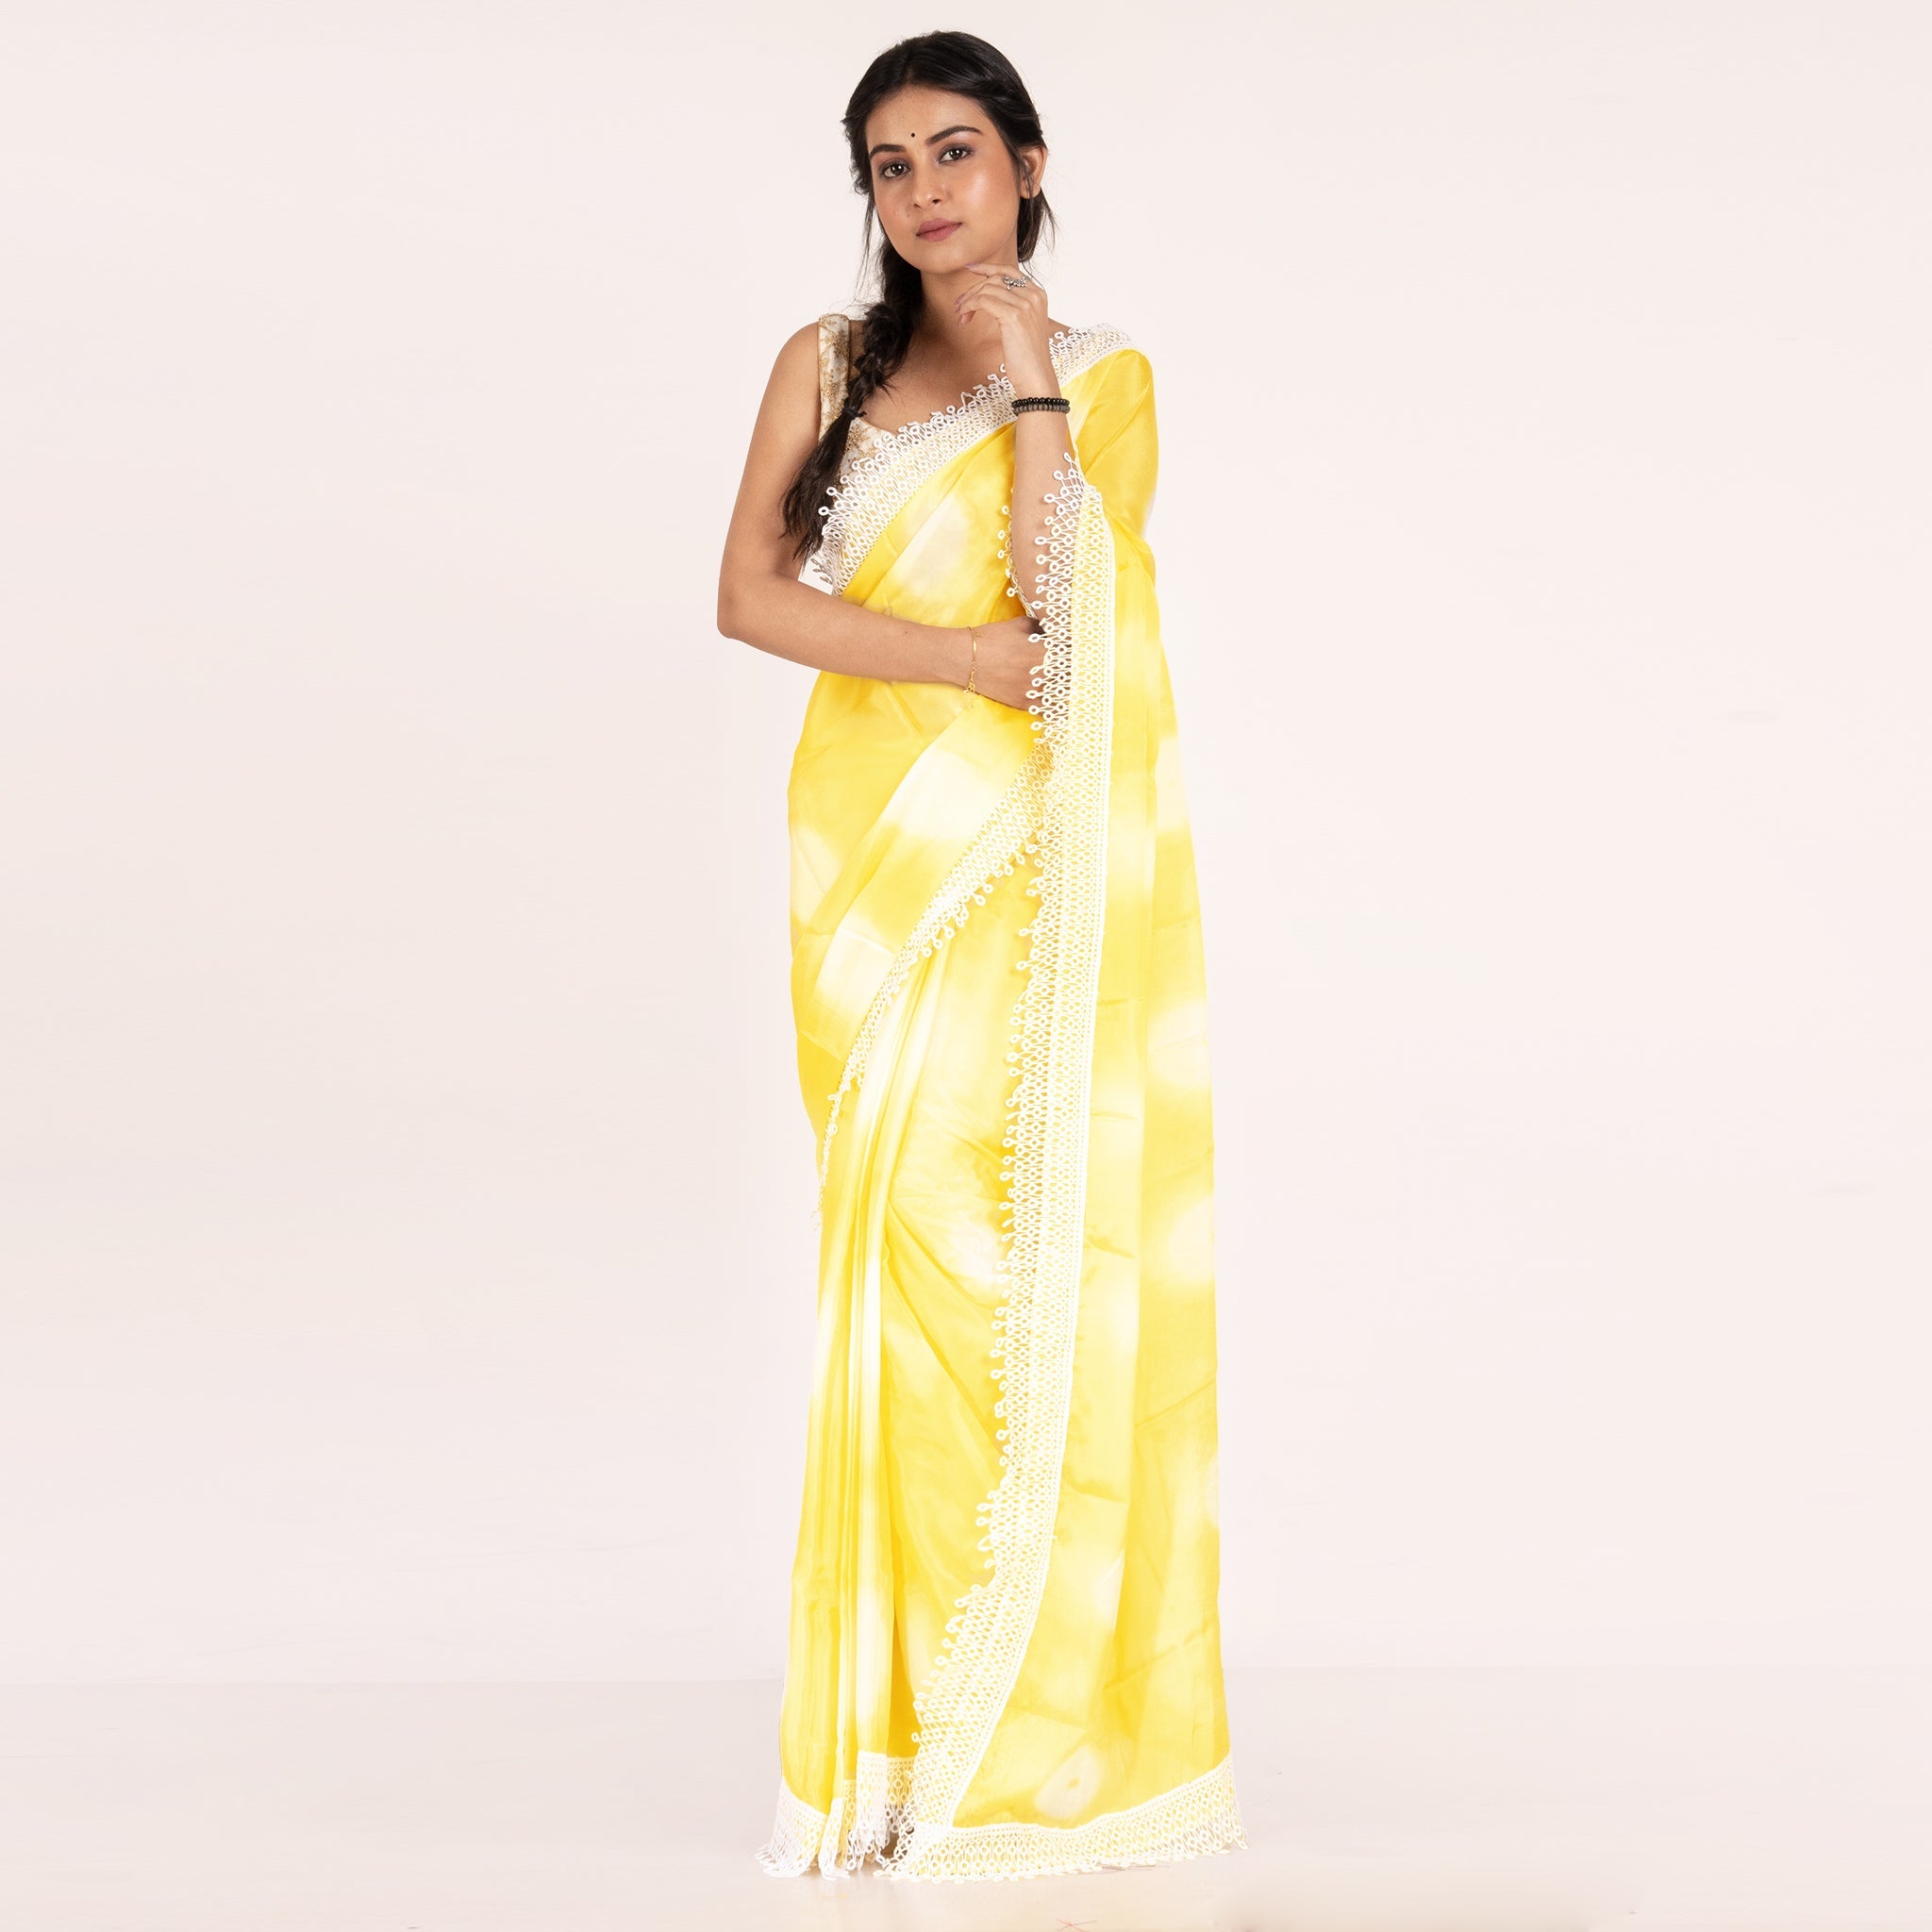 Women's Yellow Chiffon Tie And Dye Saree With Crochet Lace - Boveee